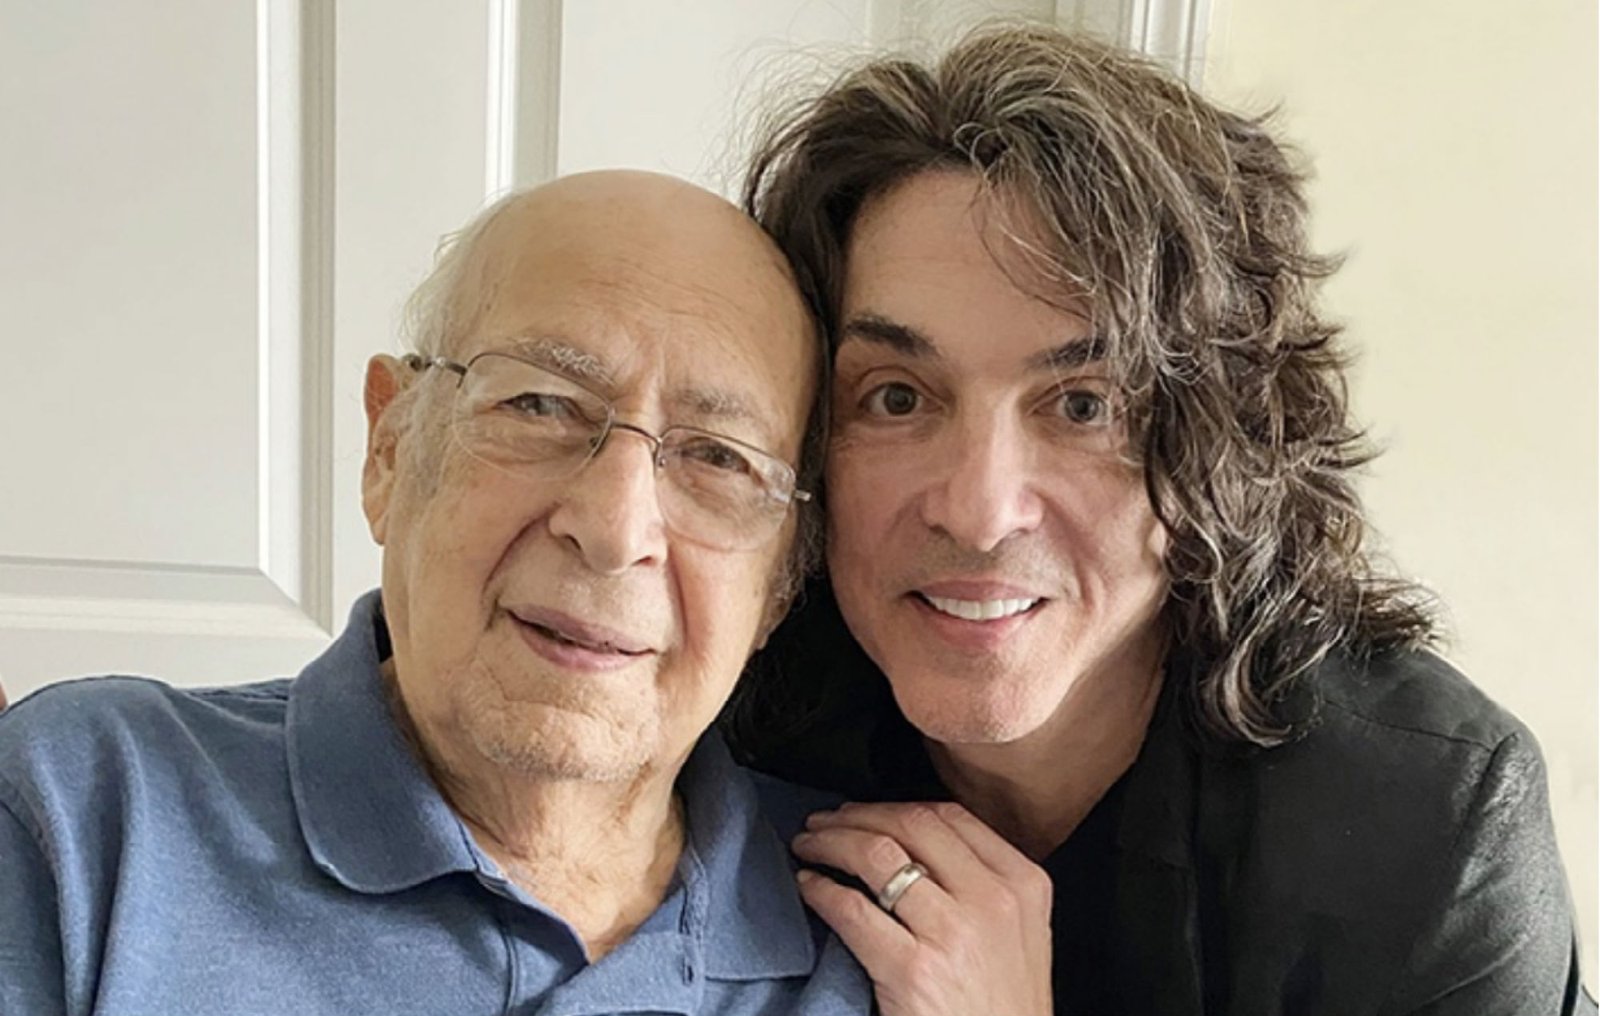 Paul Stanley and his dad